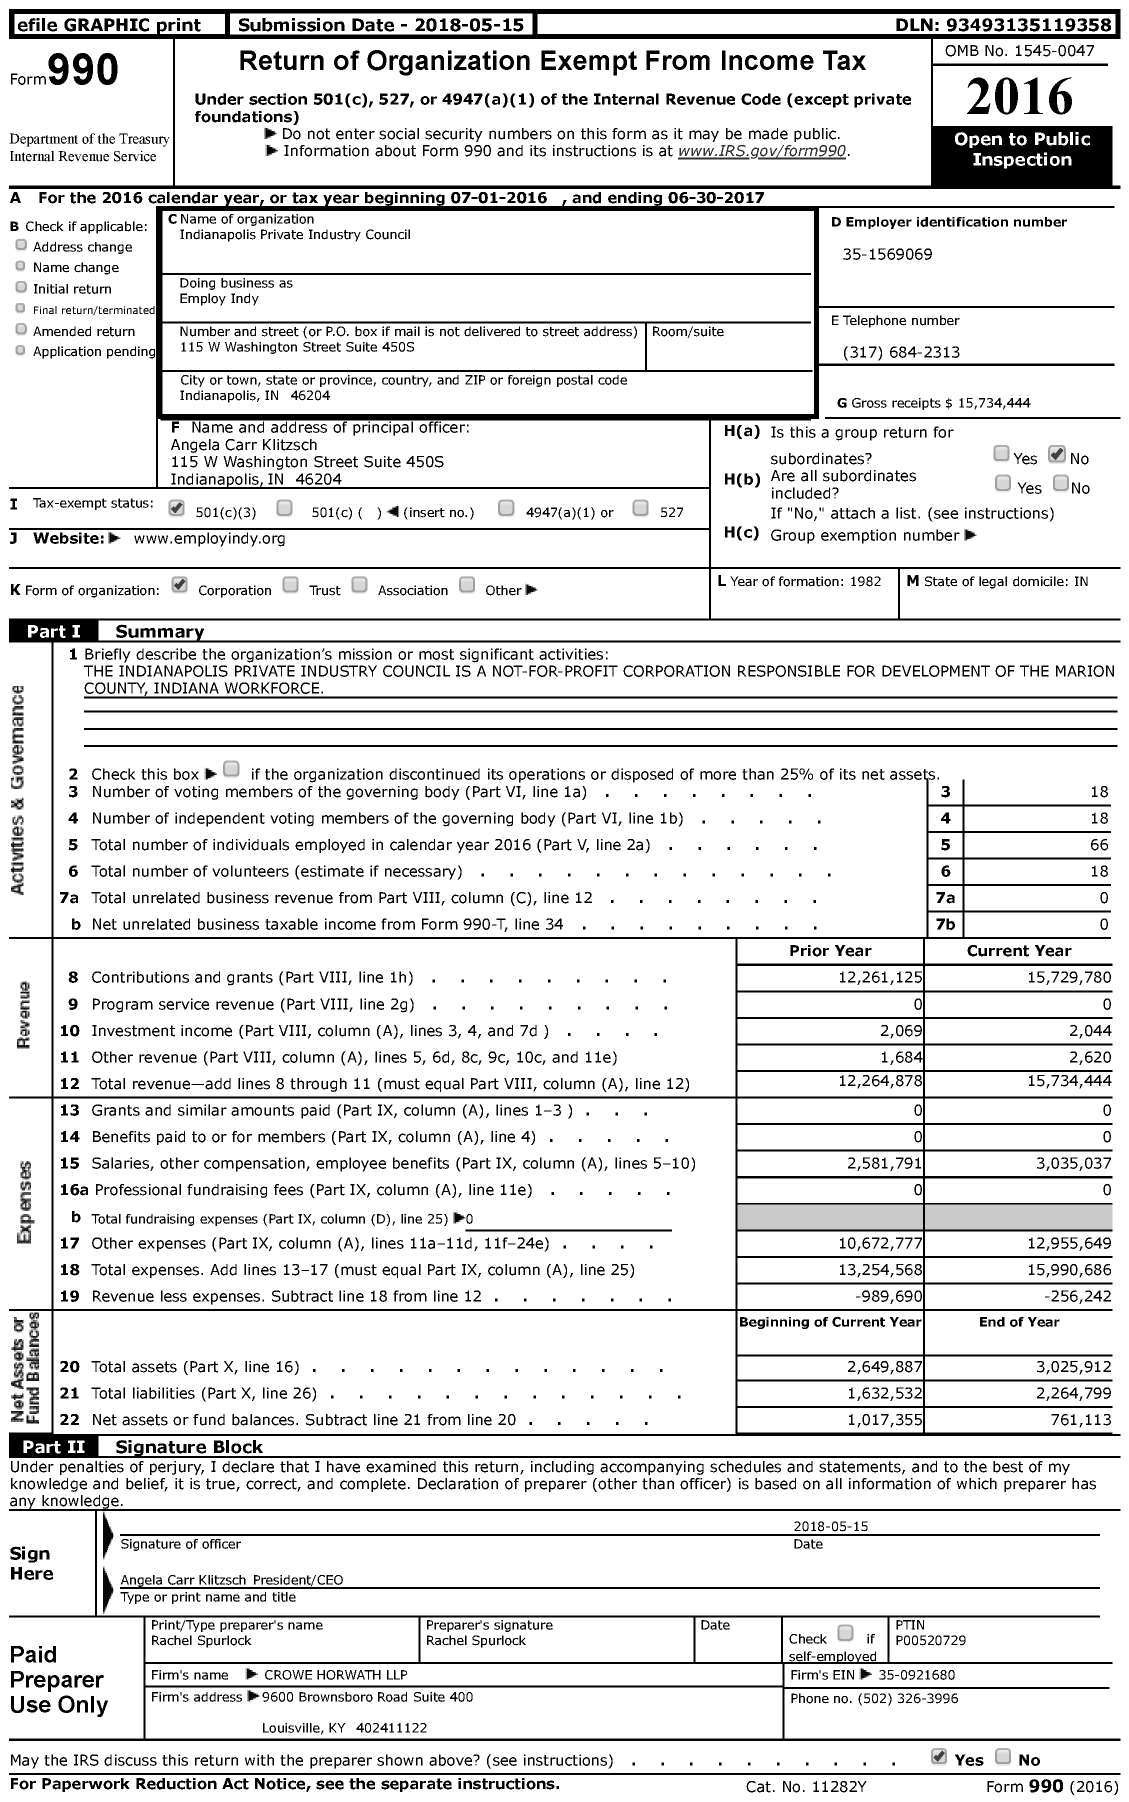 Image of first page of 2016 Form 990 for EmployIndy